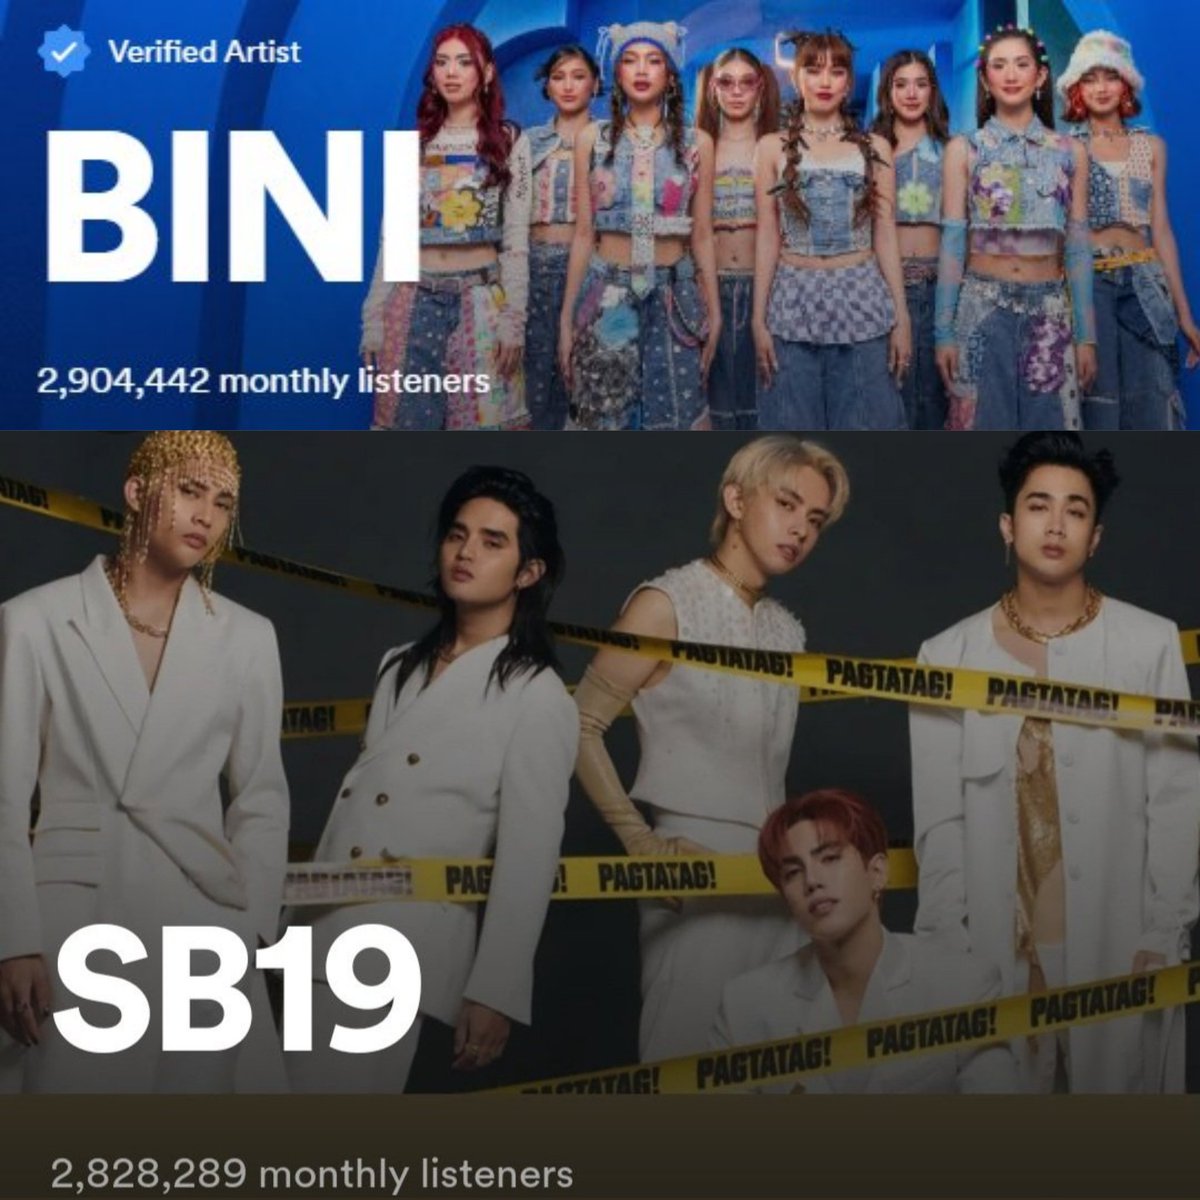 #BINI now holds the record for highest monthly listeners peak on Spotify by a Ppop group ever, surpassing the record set by the ppop kings #SB19